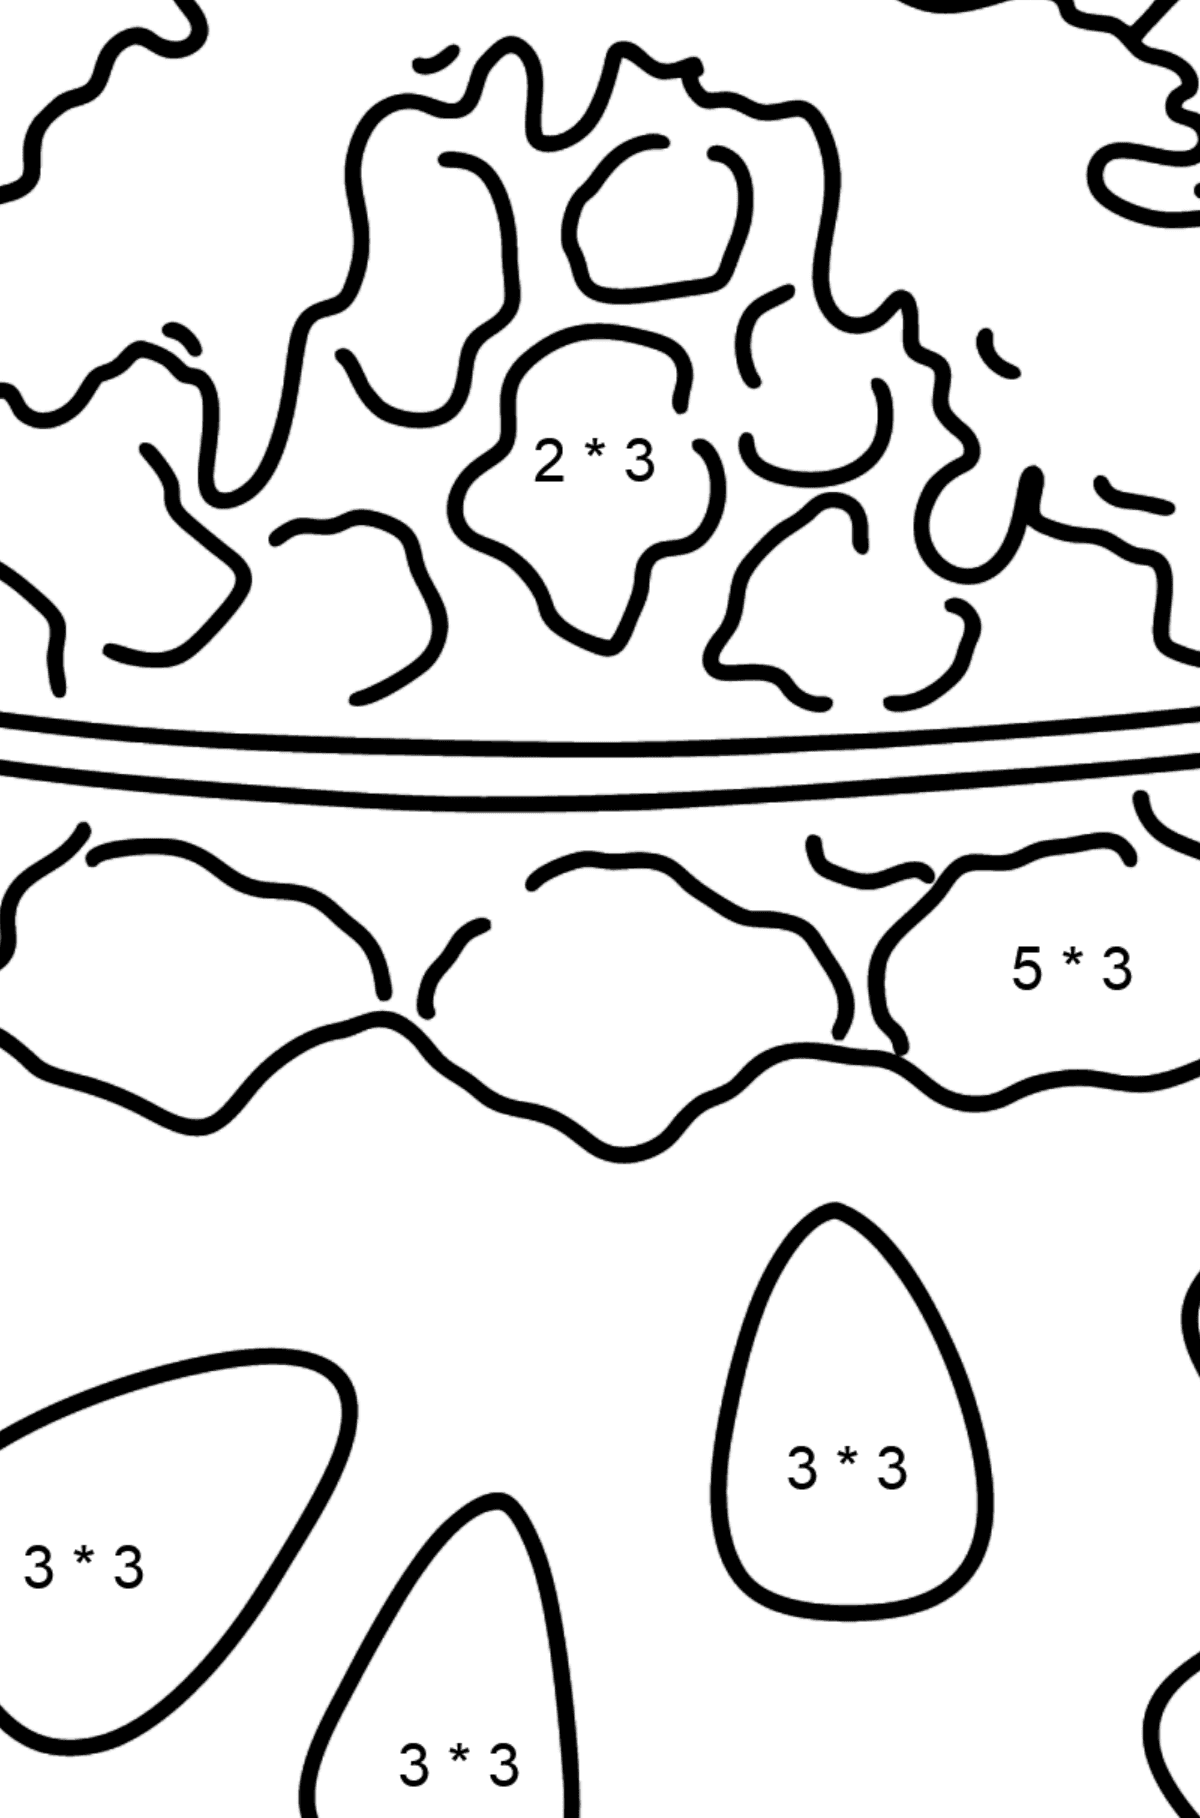 Strawberry Flakes coloring page - Math Coloring - Multiplication for Kids